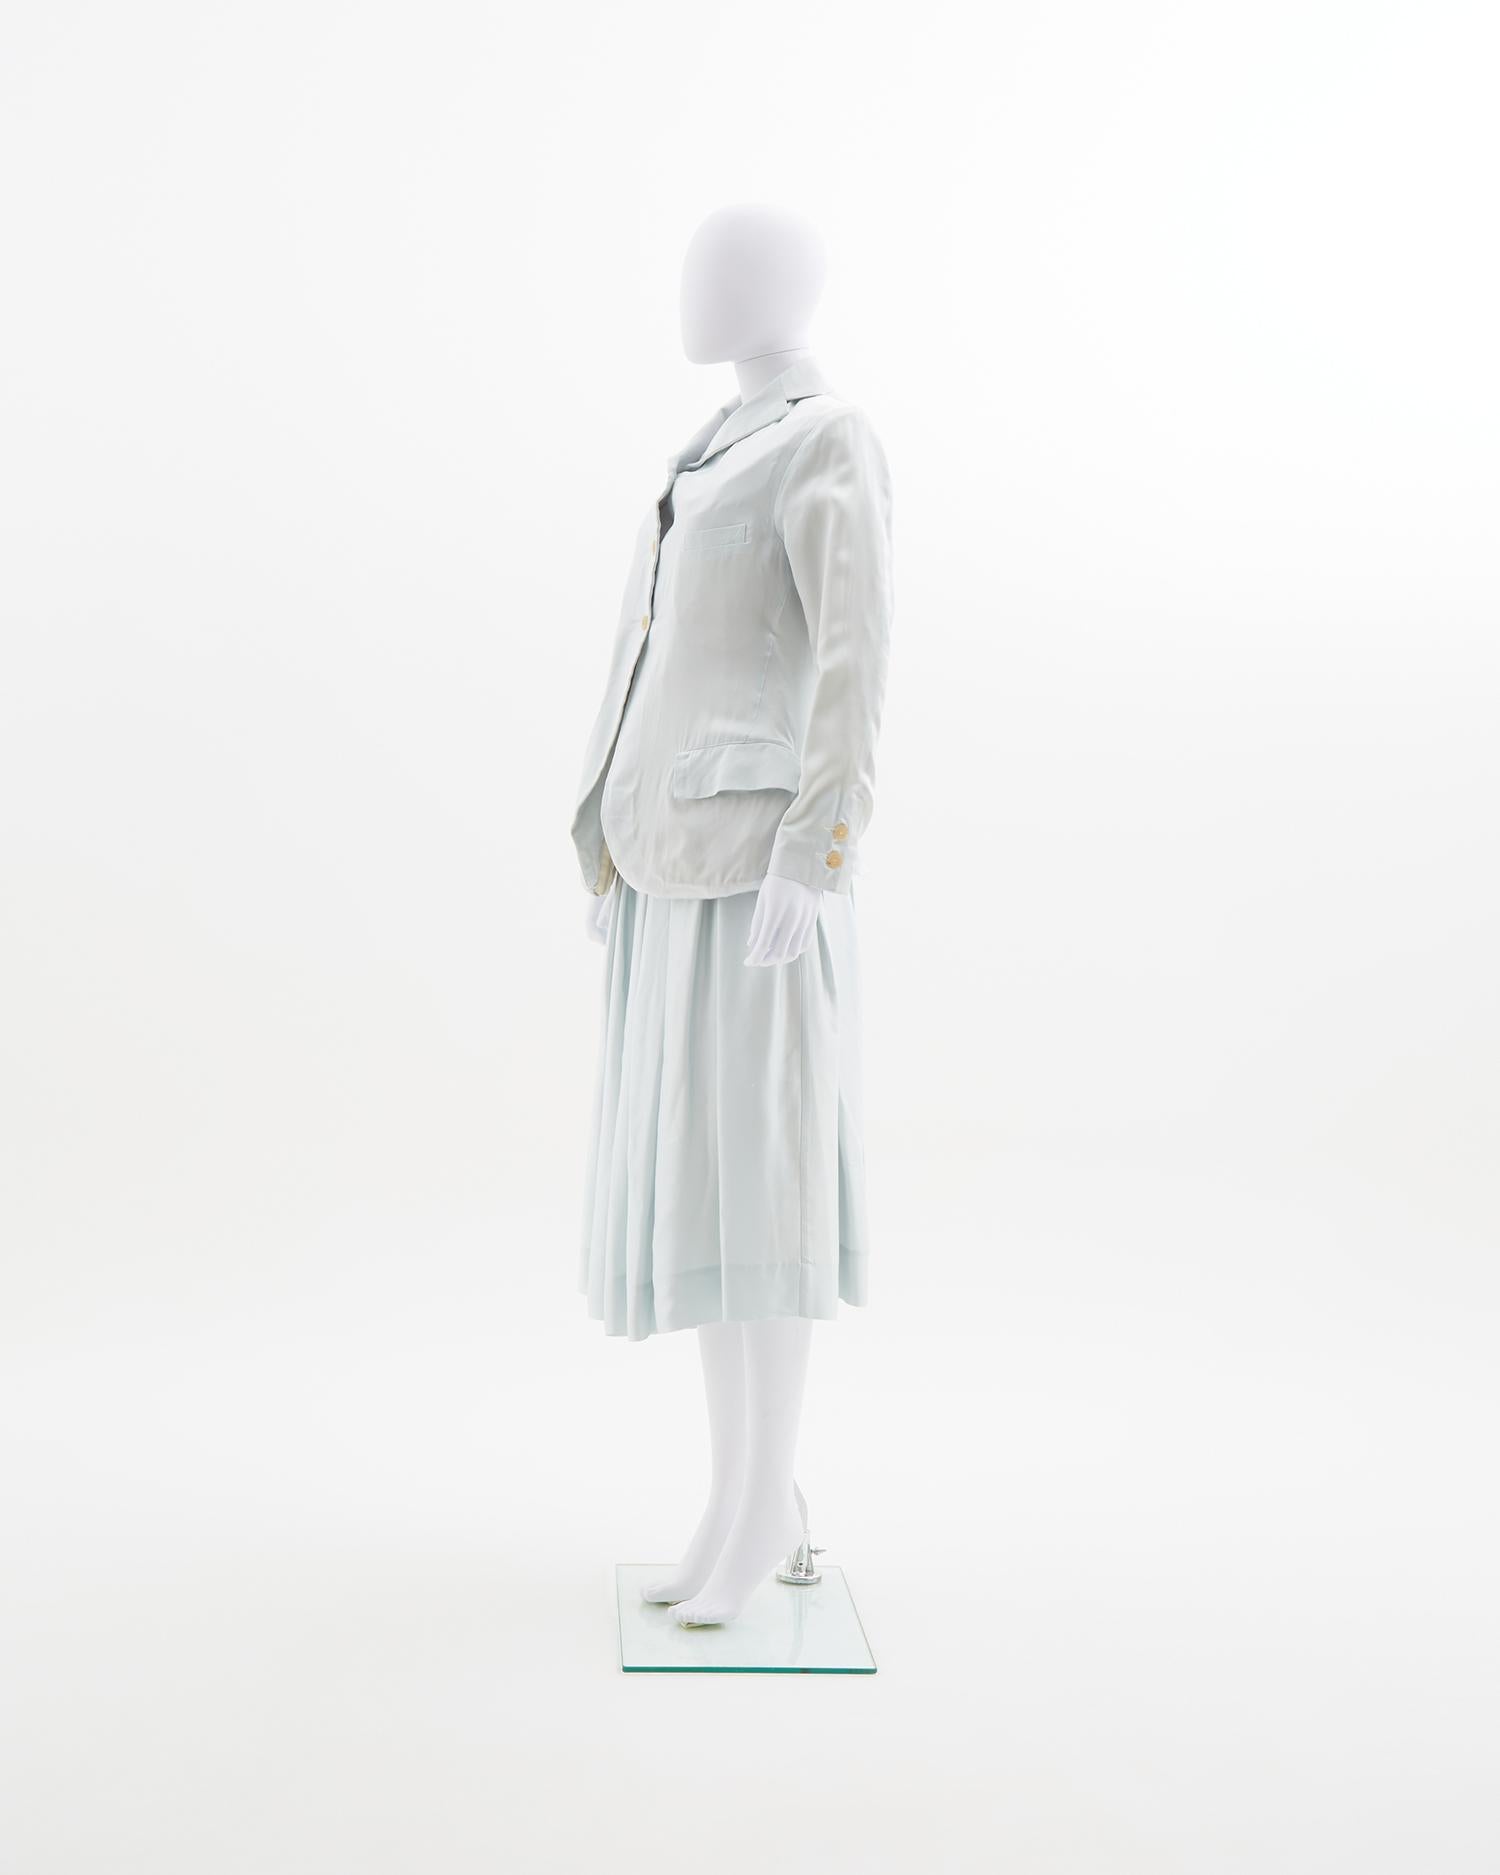 - Sugar paper silk set
- Sold by Skof.Archive 
- Single breasted button closure jacket 
- Padded jacket on the bottom 
- Ivory jacket lined with yellow and light blue cotton stripes 
- Circle skirt 
- Above knee-length skirt
- Hand washed 
- Hand